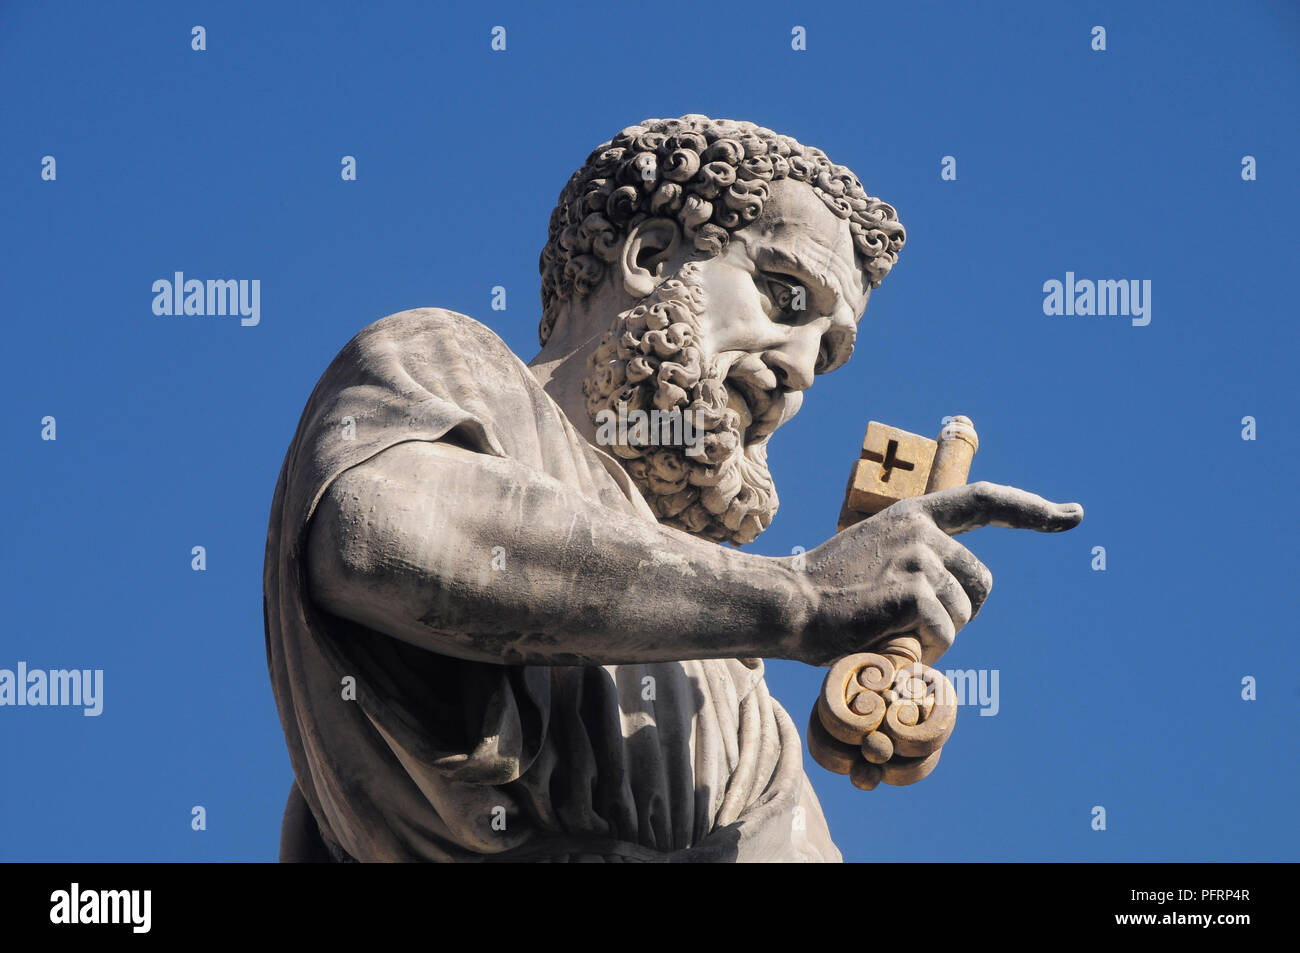 Italy, Rome, Vatican City, St Peter's Square, statue of St Peter Stock Photo